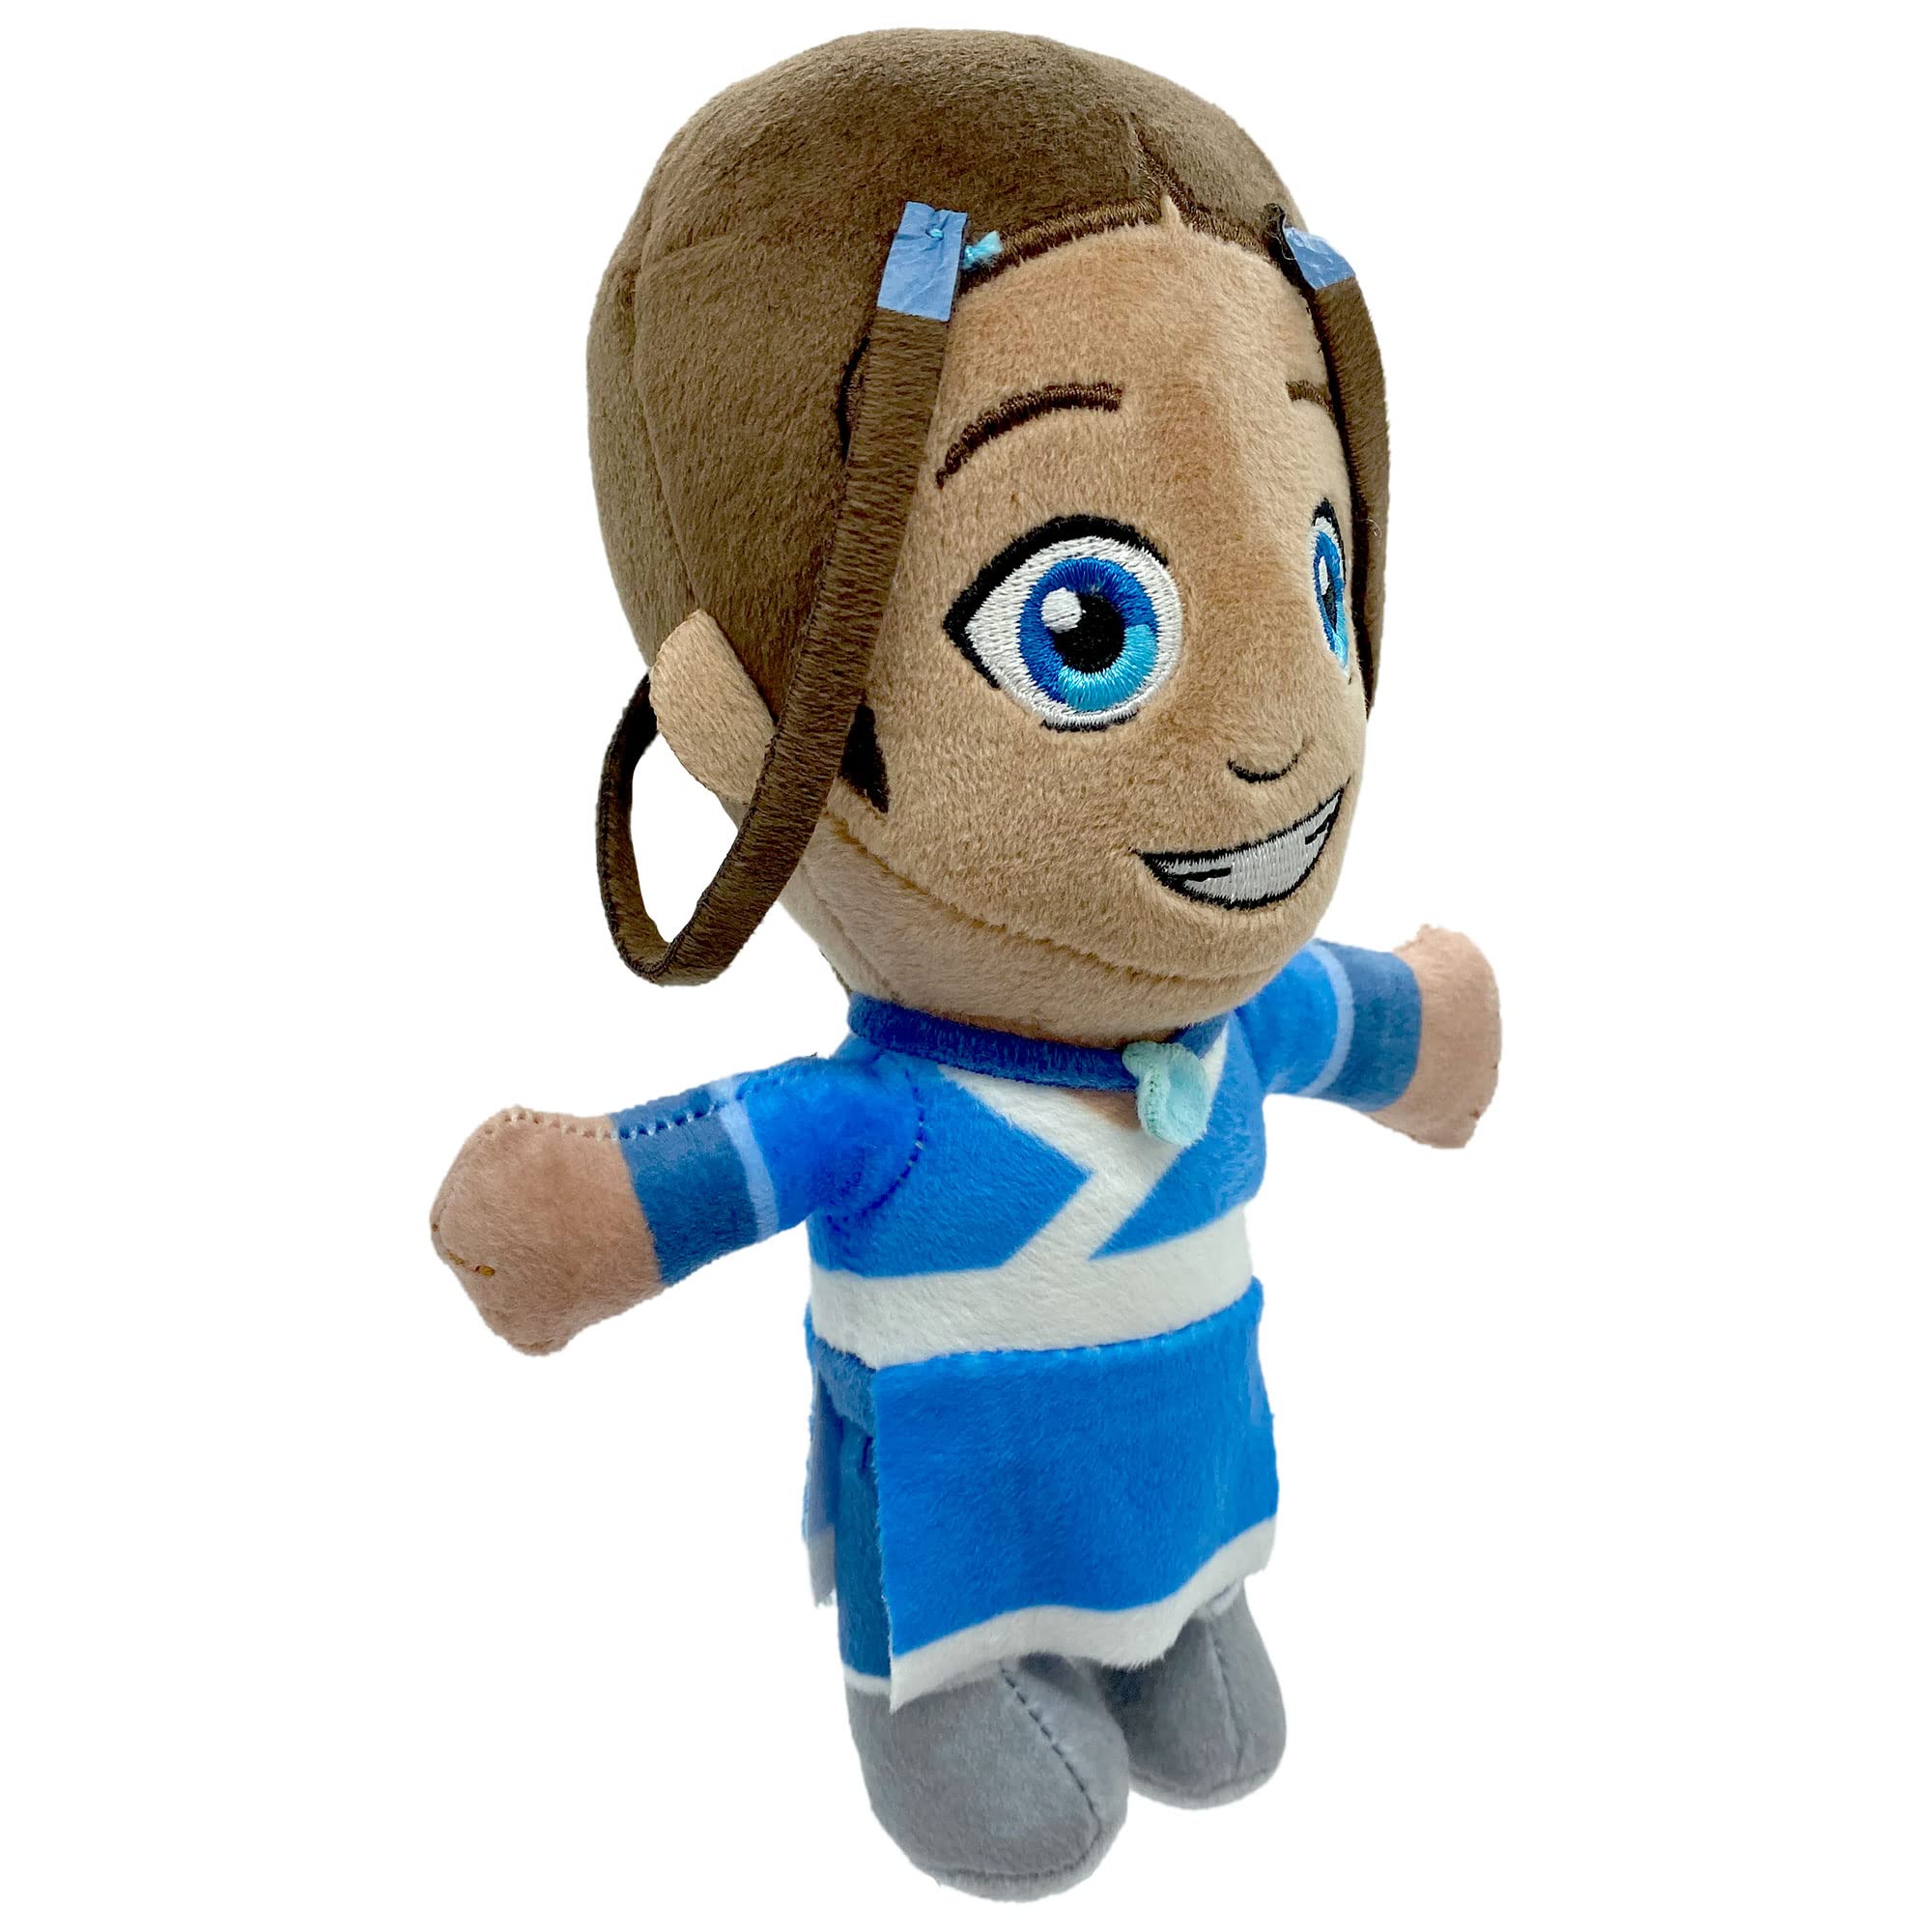 JINX Avatar: The Last Airbender Katara Small Plush Toy, 7.5-in Stuffed Figure from Nickelodeon TV Series for Fans of All Ages